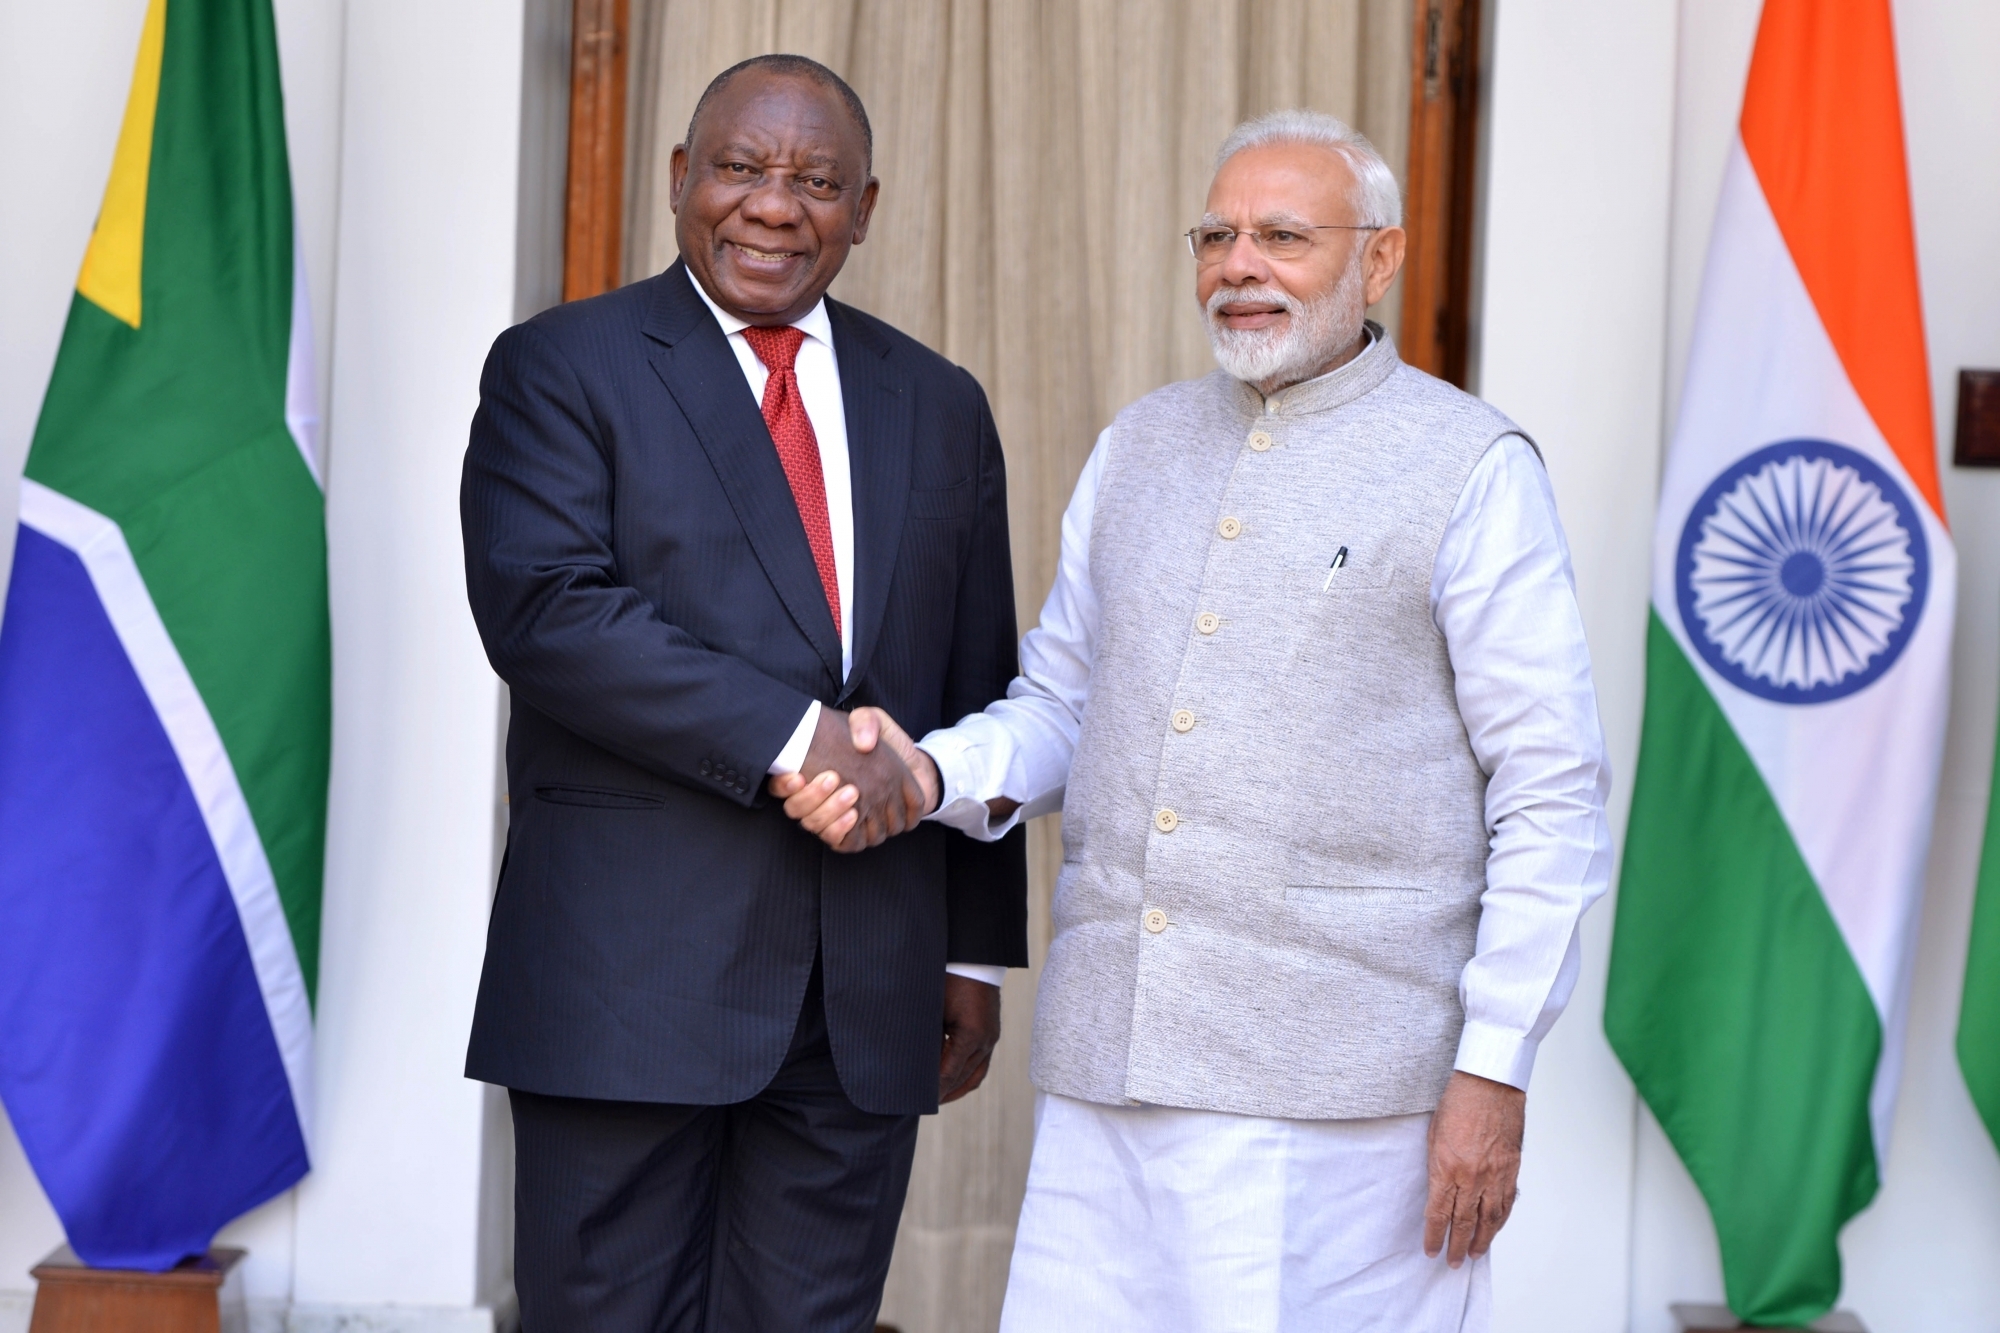  Pm Modi Speaks With S.african President, Discusses Bilateral Relations-TeluguStop.com